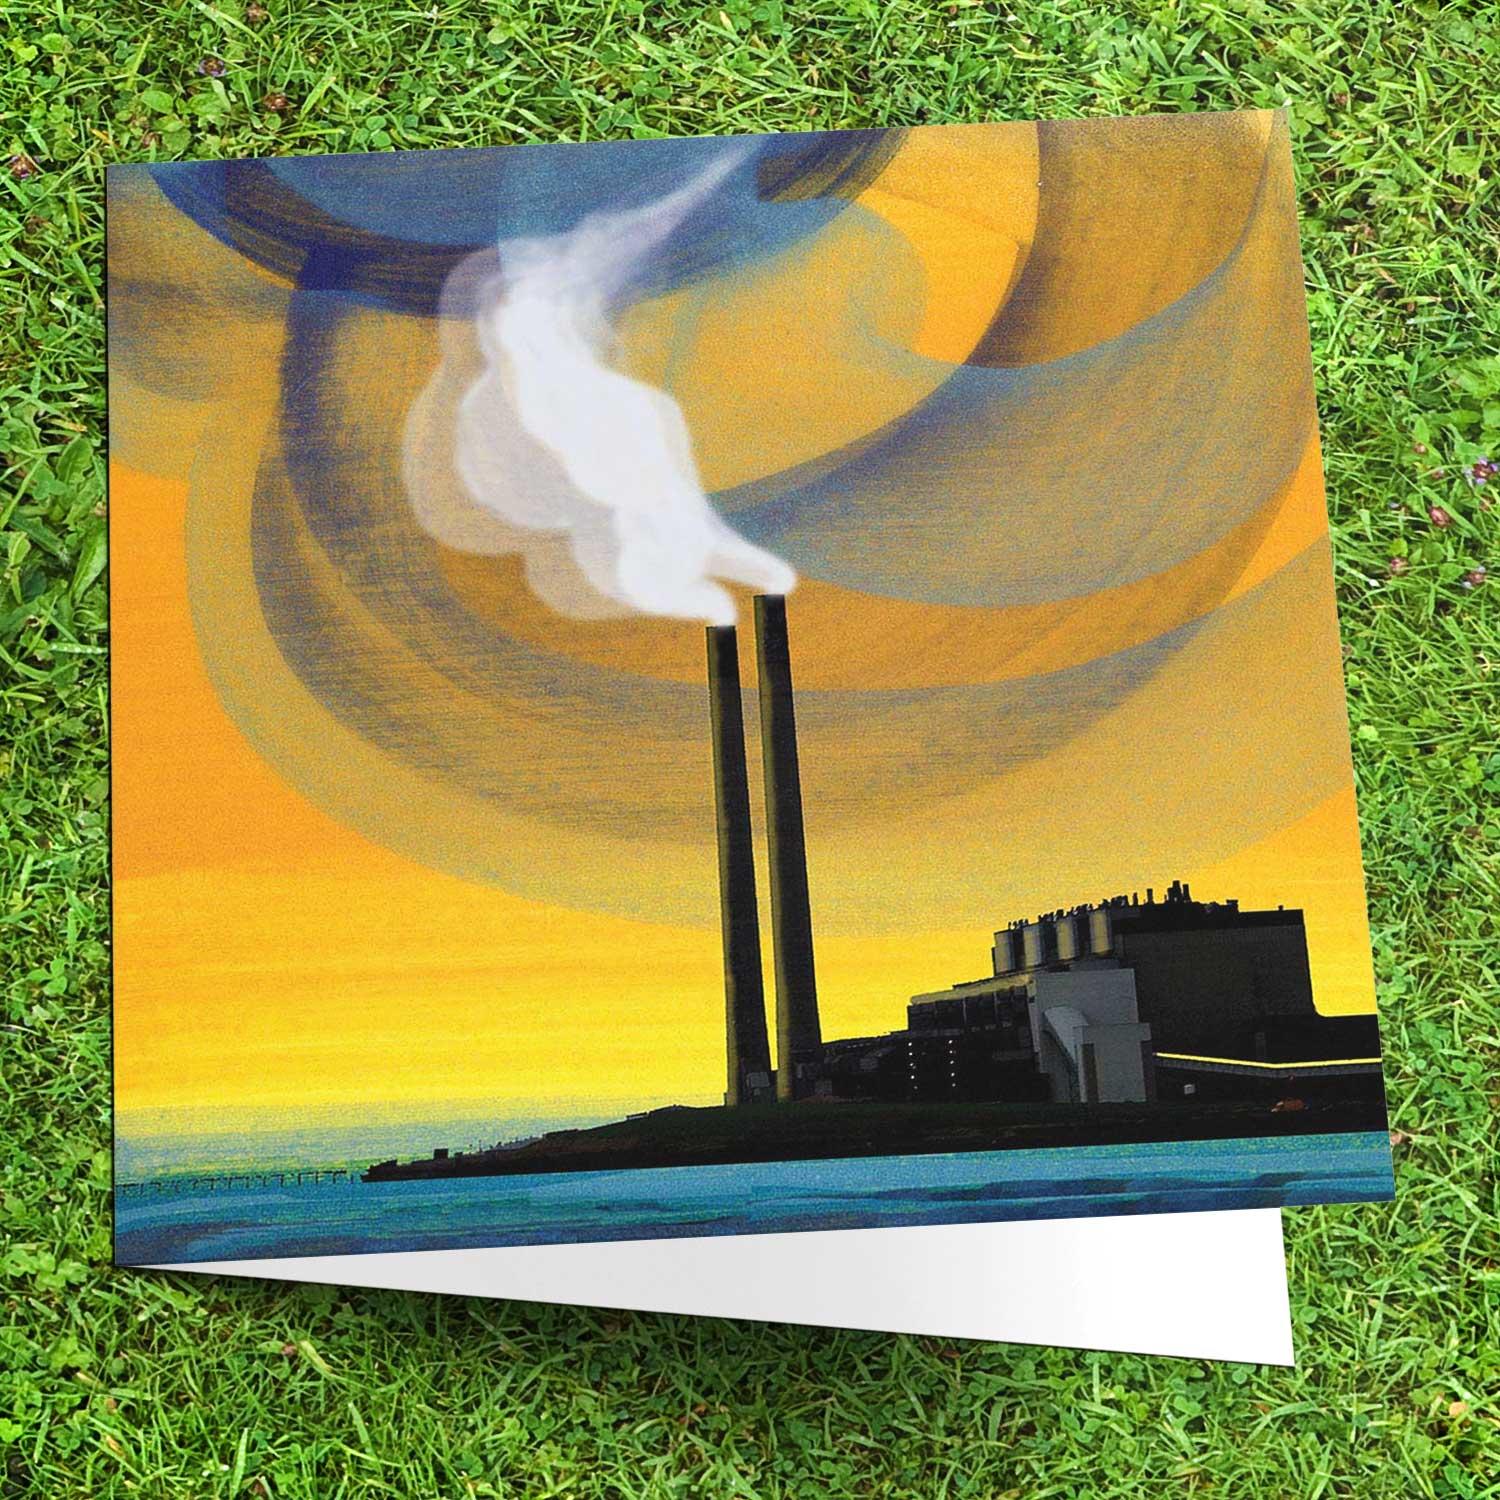 Cockenzie Chimneys Greeting Card from an original painting by artist Esther Cohen